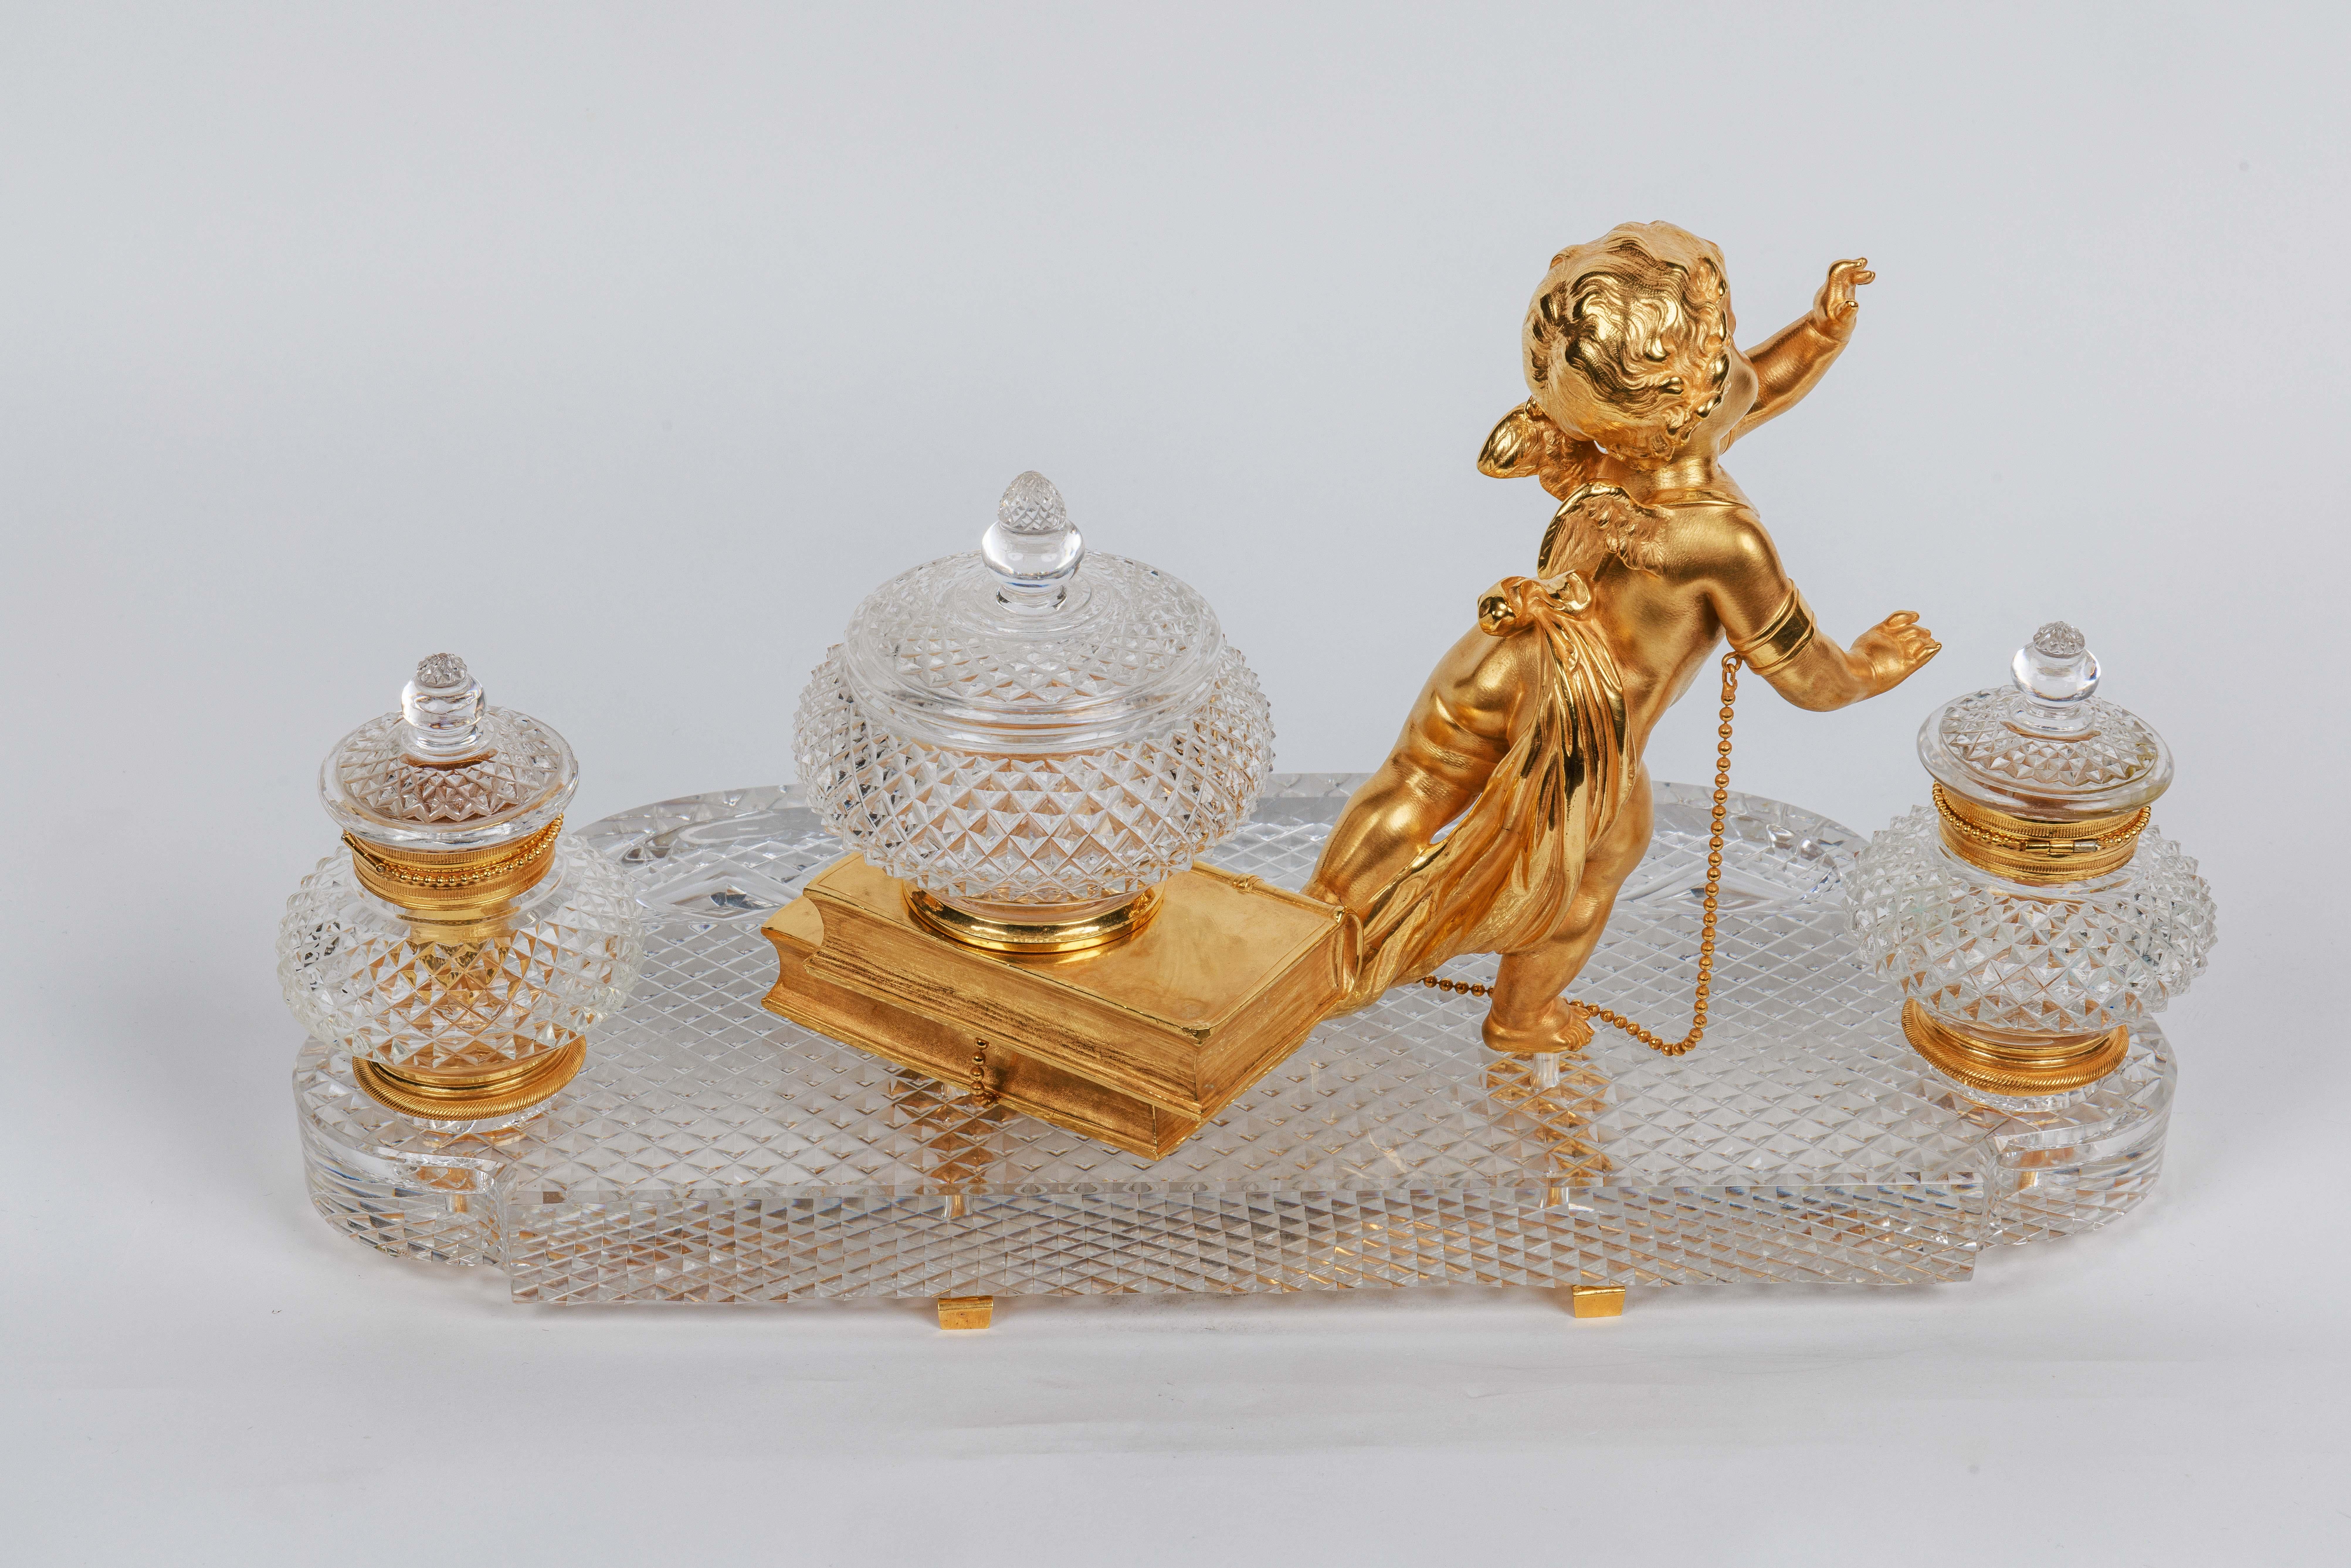 Napoleon III Rare French Ormolu and Diamond-Cut Crystal Figural Inkwell Encrier by Baccarat For Sale